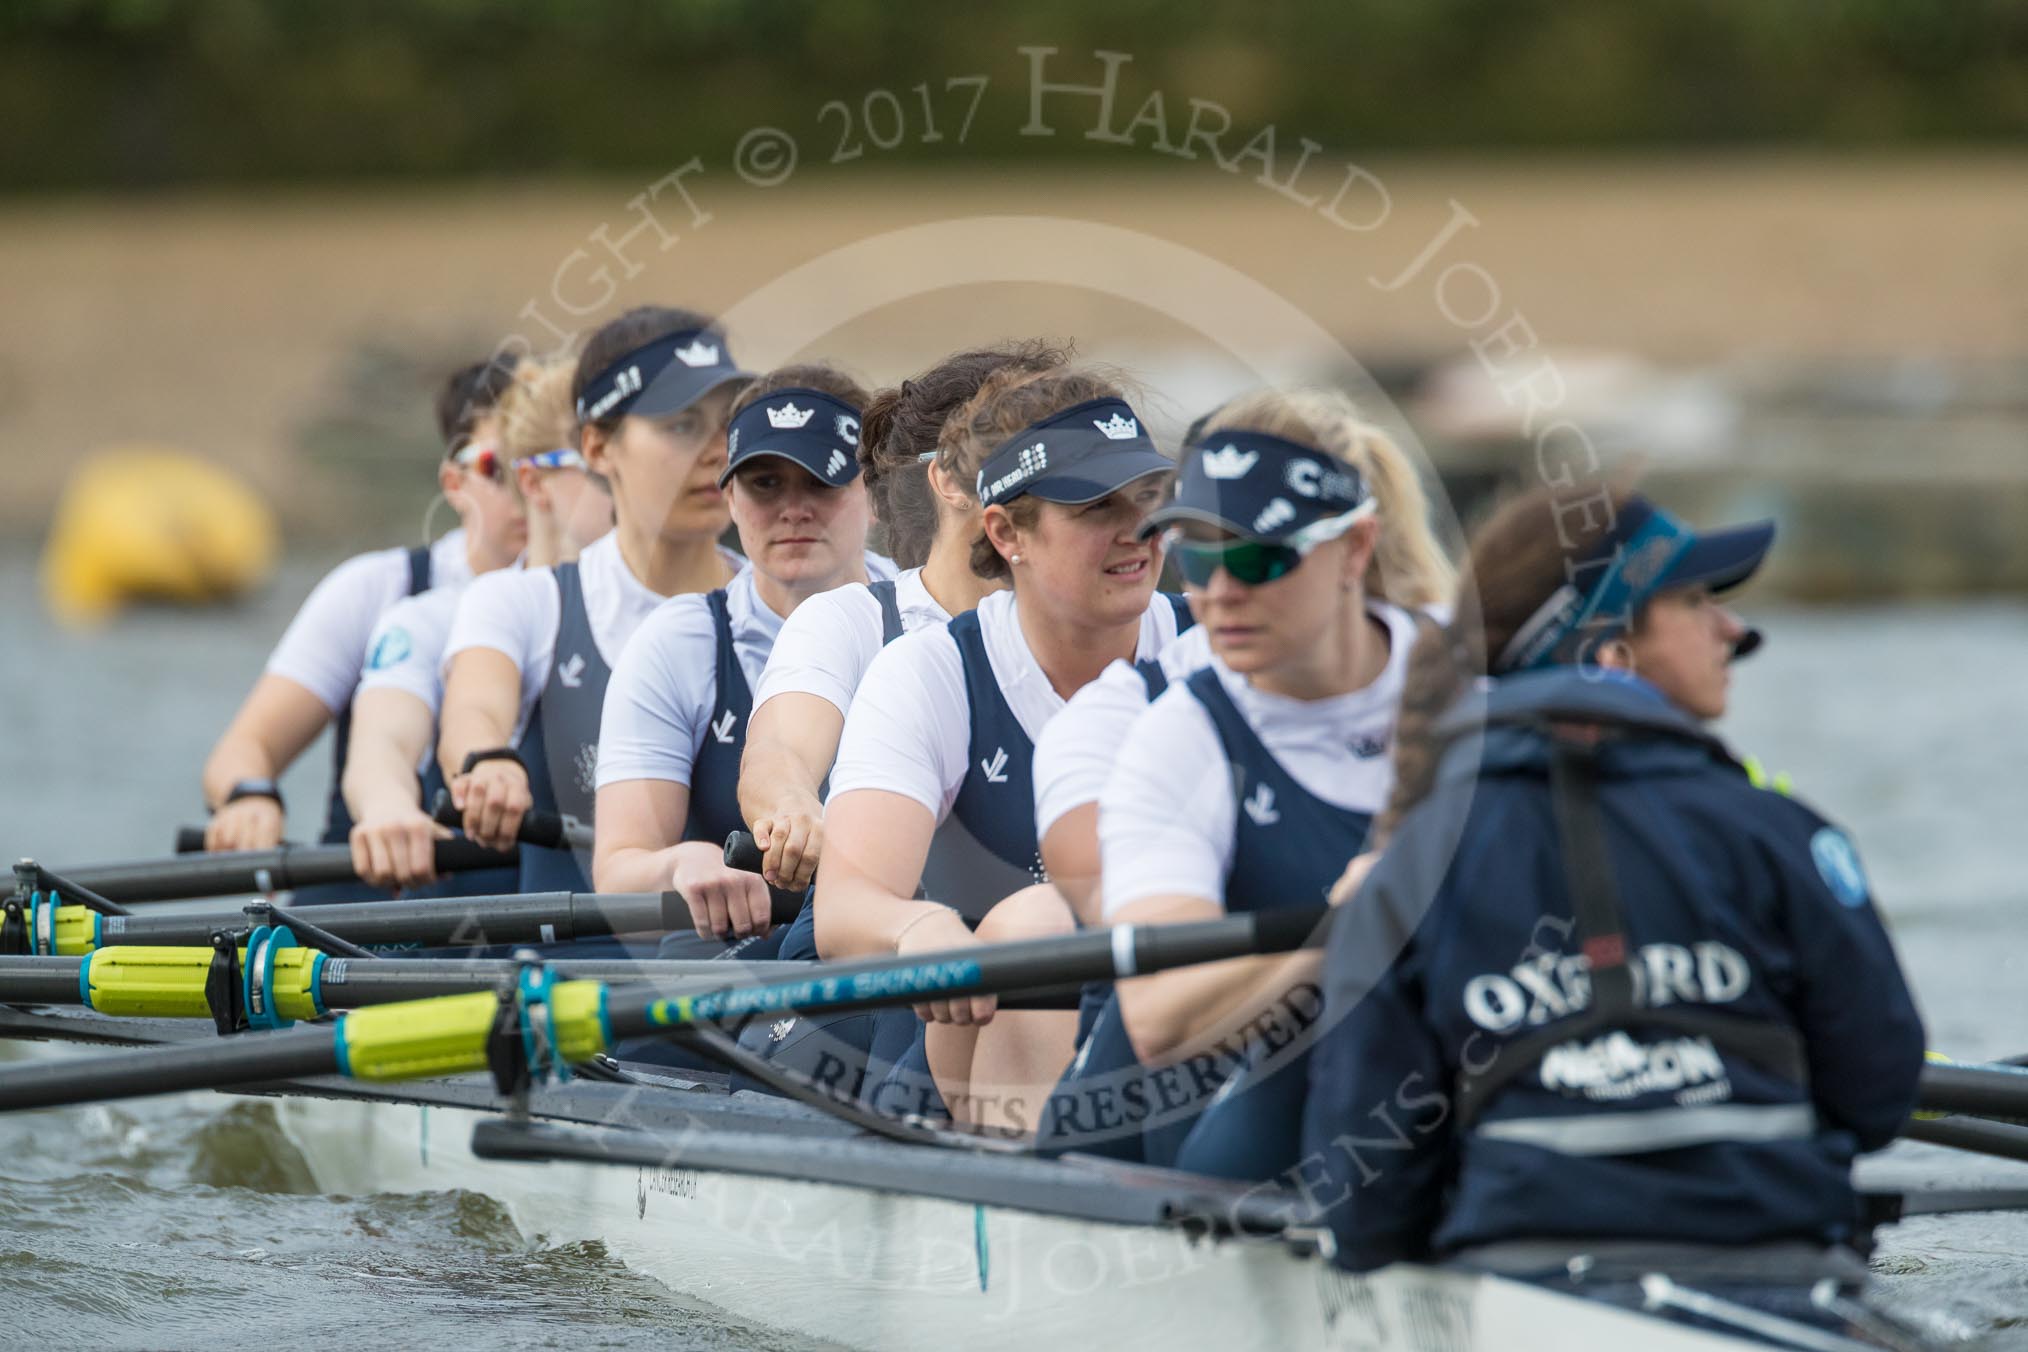 The Cancer Research UK Boat Race season 2017 - Women's Boat Race Fixture OUWBC vs Molesey BC: The OUWBC boat before the start of the race - bow Alice Roberts, 2 Beth Bridgman, 3 Rebecca Te Water Naude, 4 Rebecca Esselstein, 5 Chloe Laverack, 6 Harriet Austin, 7 Jenna Hebert, stroke Emily Cameron, cox Eleanor Shearer.
River Thames between Putney Bridge and Mortlake,
London SW15,

United Kingdom,
on 19 March 2017 at 15:55, image #39